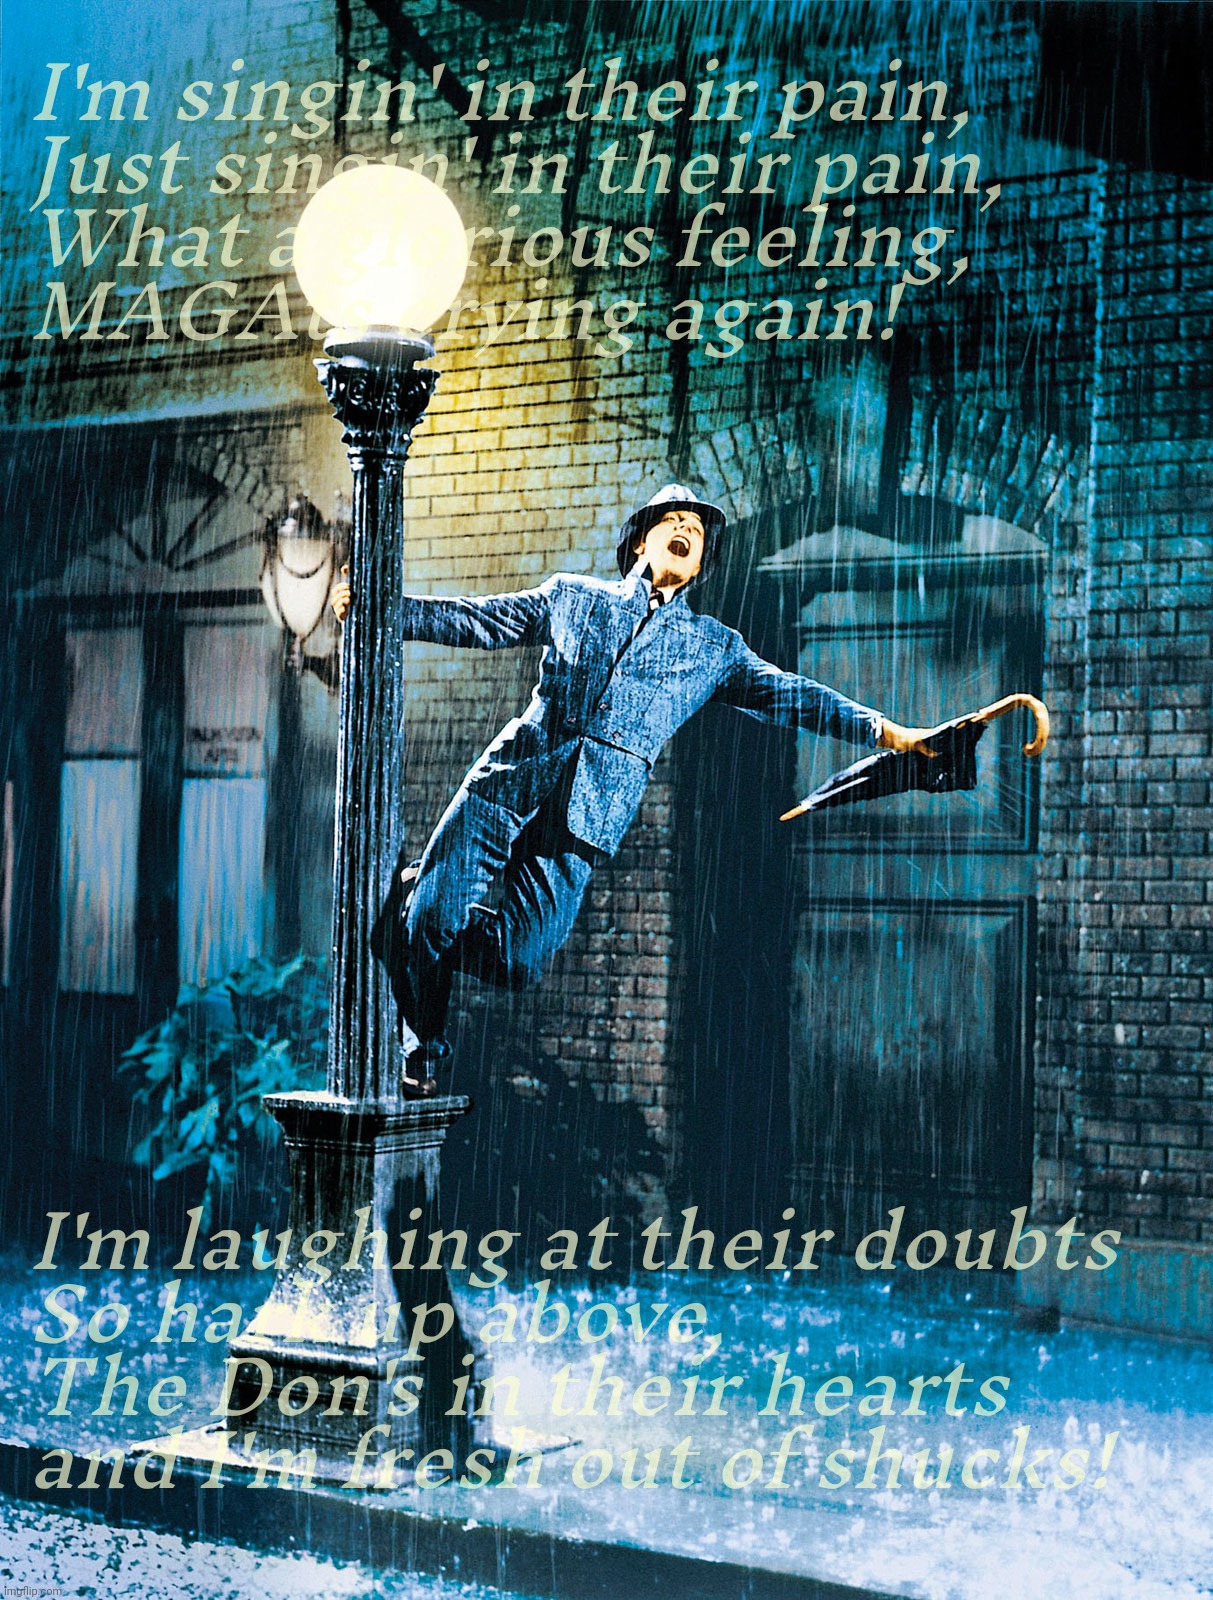 Singing in the Rain, MAGAt tears edition | I'm singin' in their pain,
Just singin' in their pain,
What a glorious feeling,
MAGAts crying again! I'm laughing at their doubts
So hark up | image tagged in singing in the rain,singing in their pain,magat crying again,34 counts guilty,don the con couldn't keep his silk pants on,trump | made w/ Imgflip meme maker